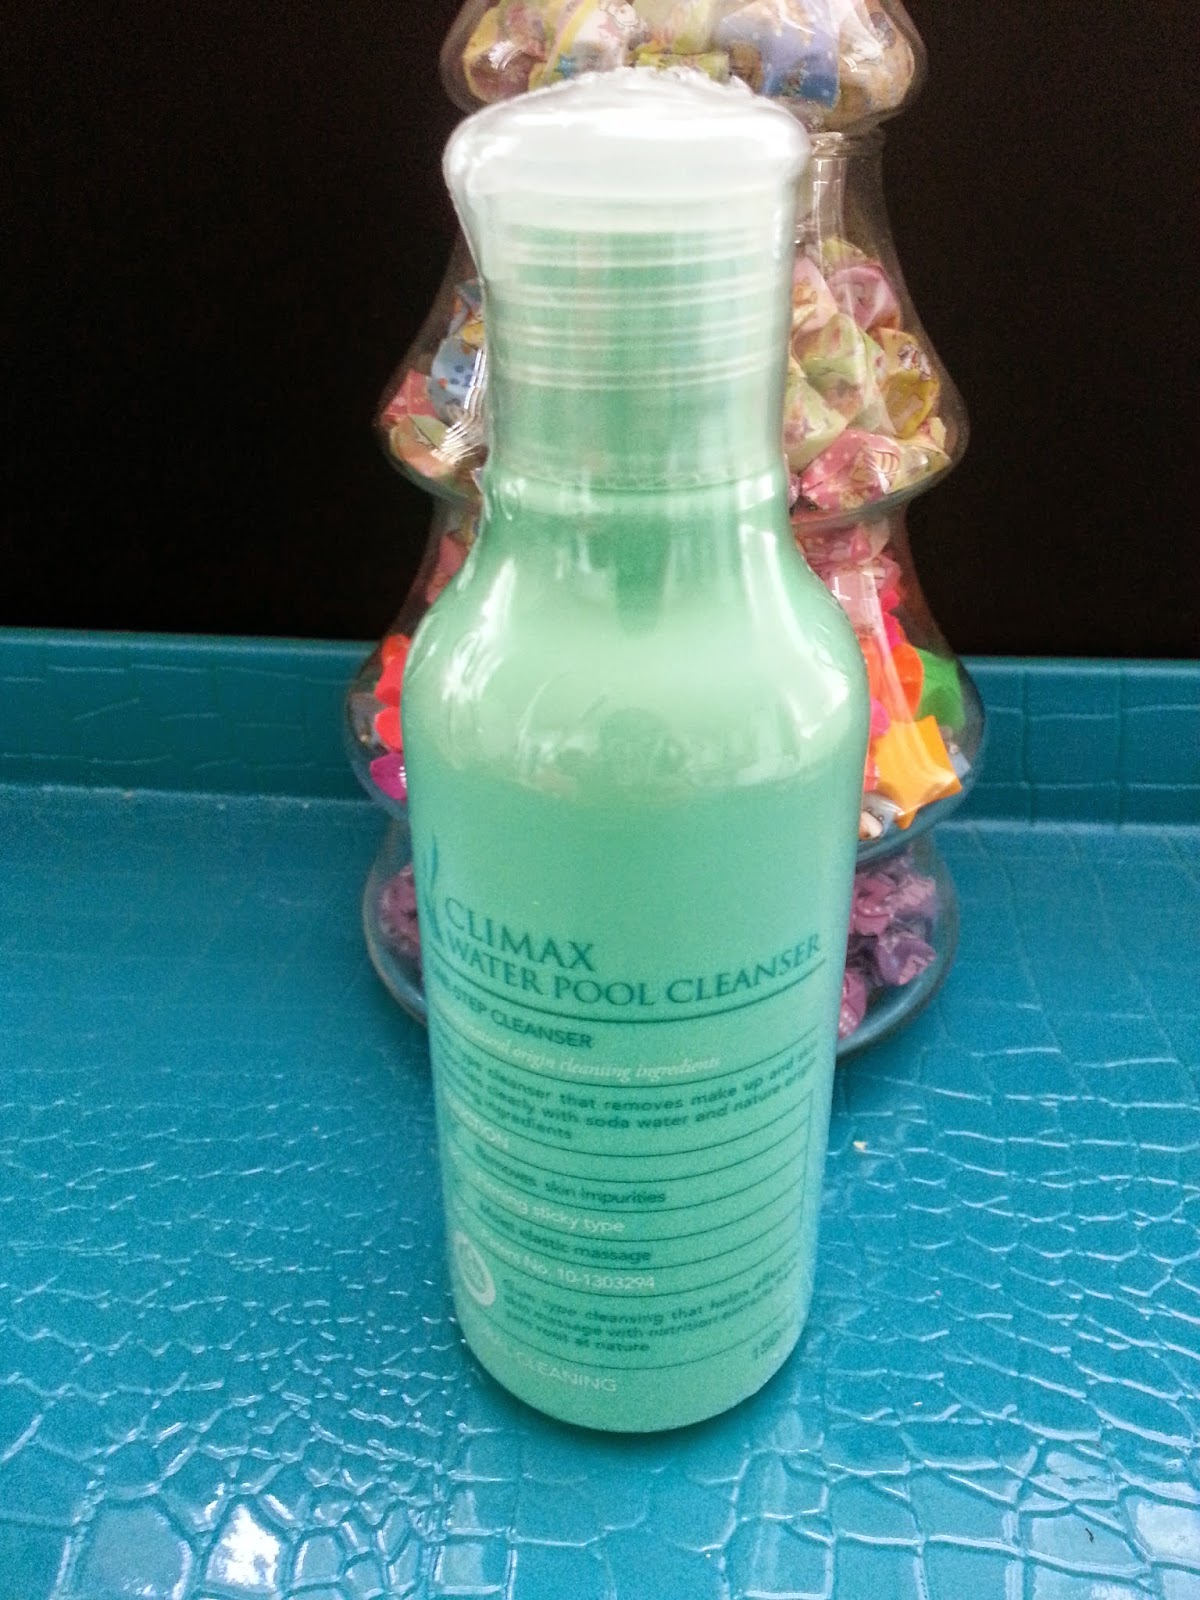 Climax Water Pool Cleanser